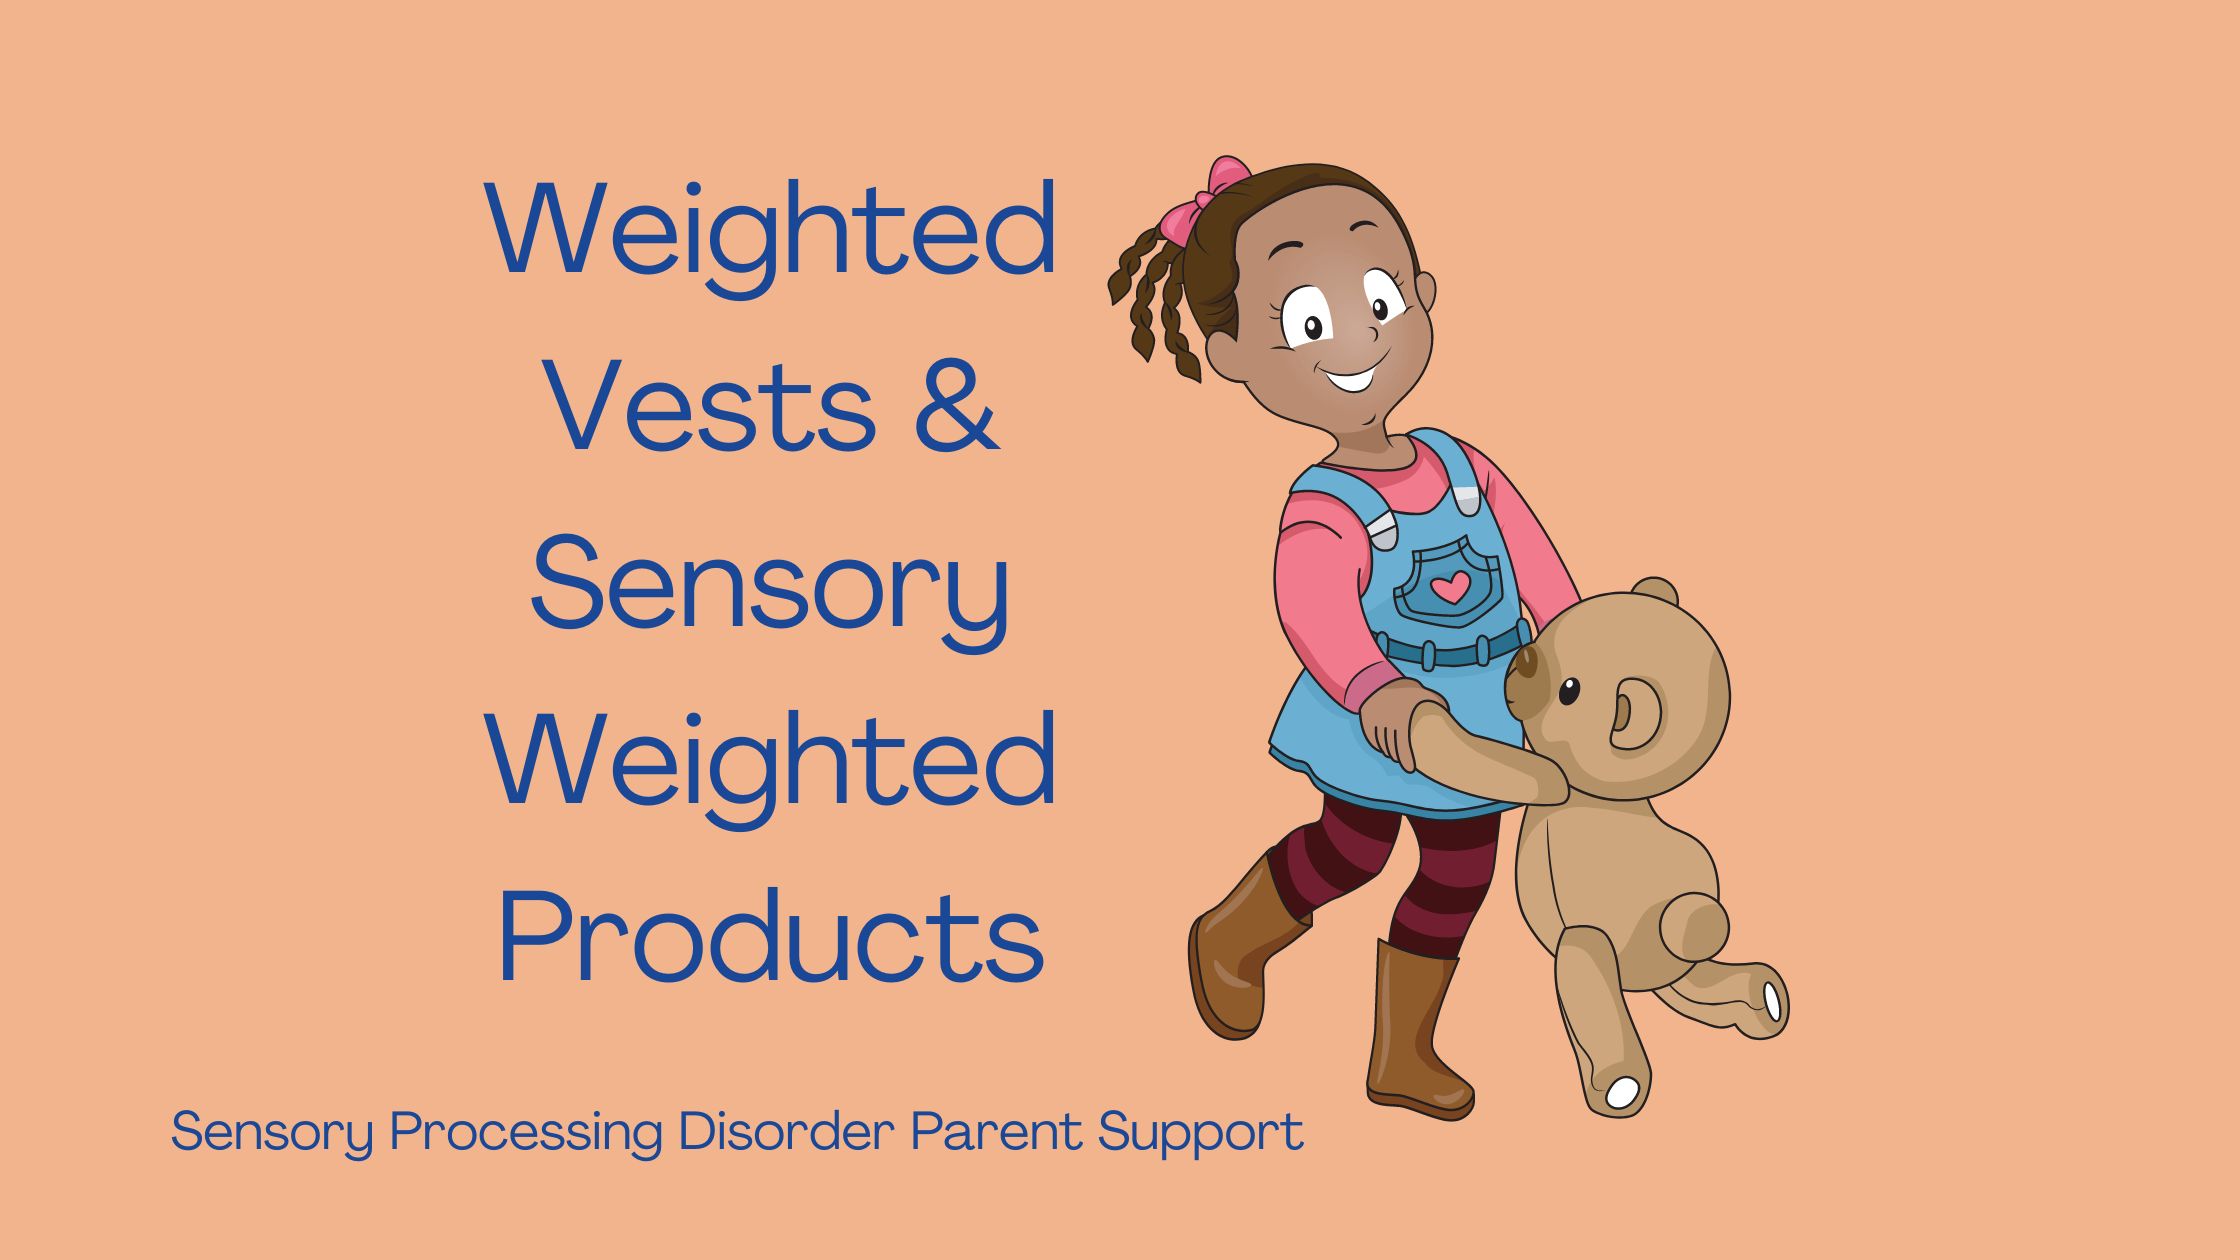 Weighted Vests & Sensory Weighted Products Sensory Processing Disorder